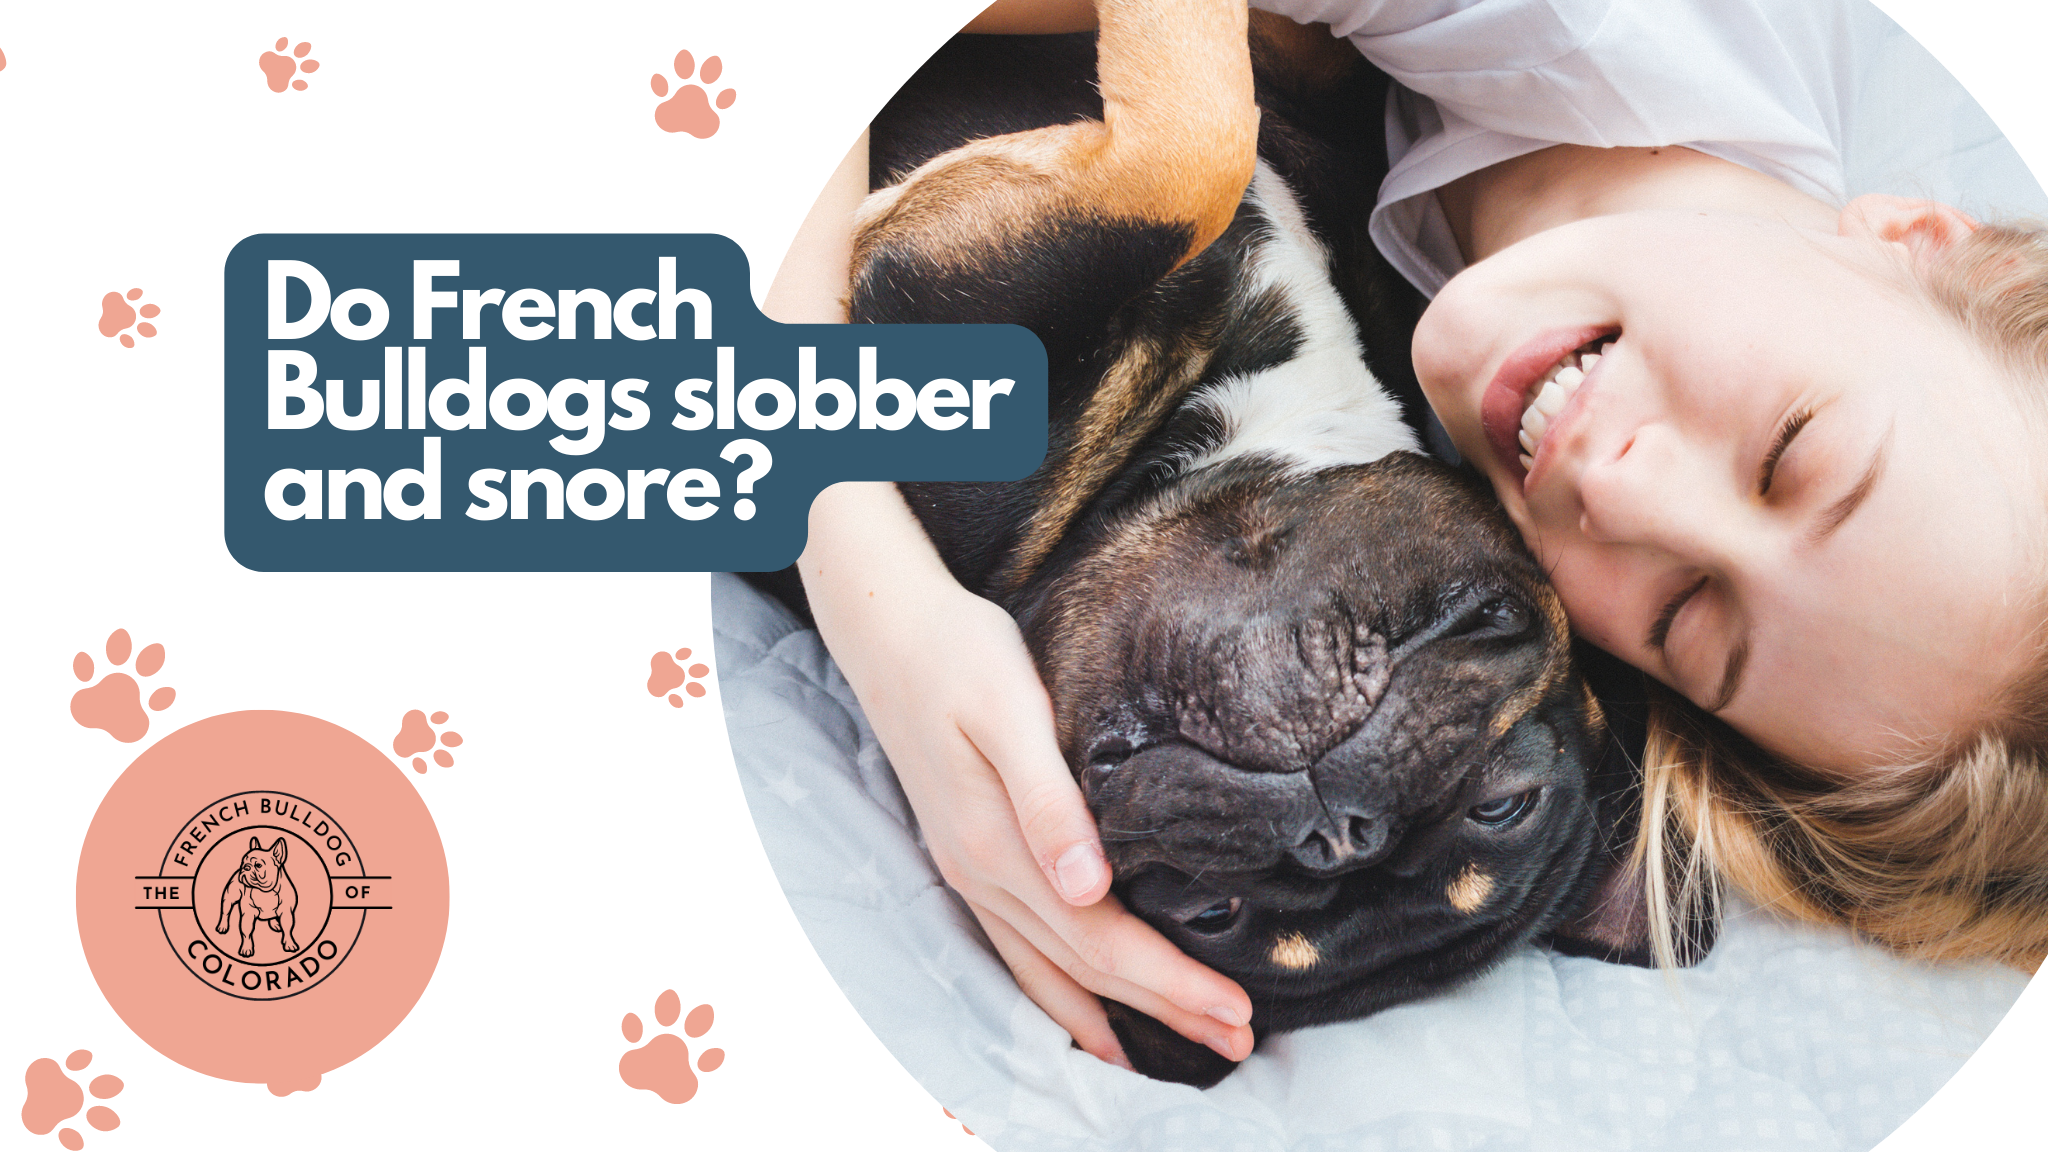 Do French Bulldogs slobber and snore? The French Bulldog of Colorado Blog